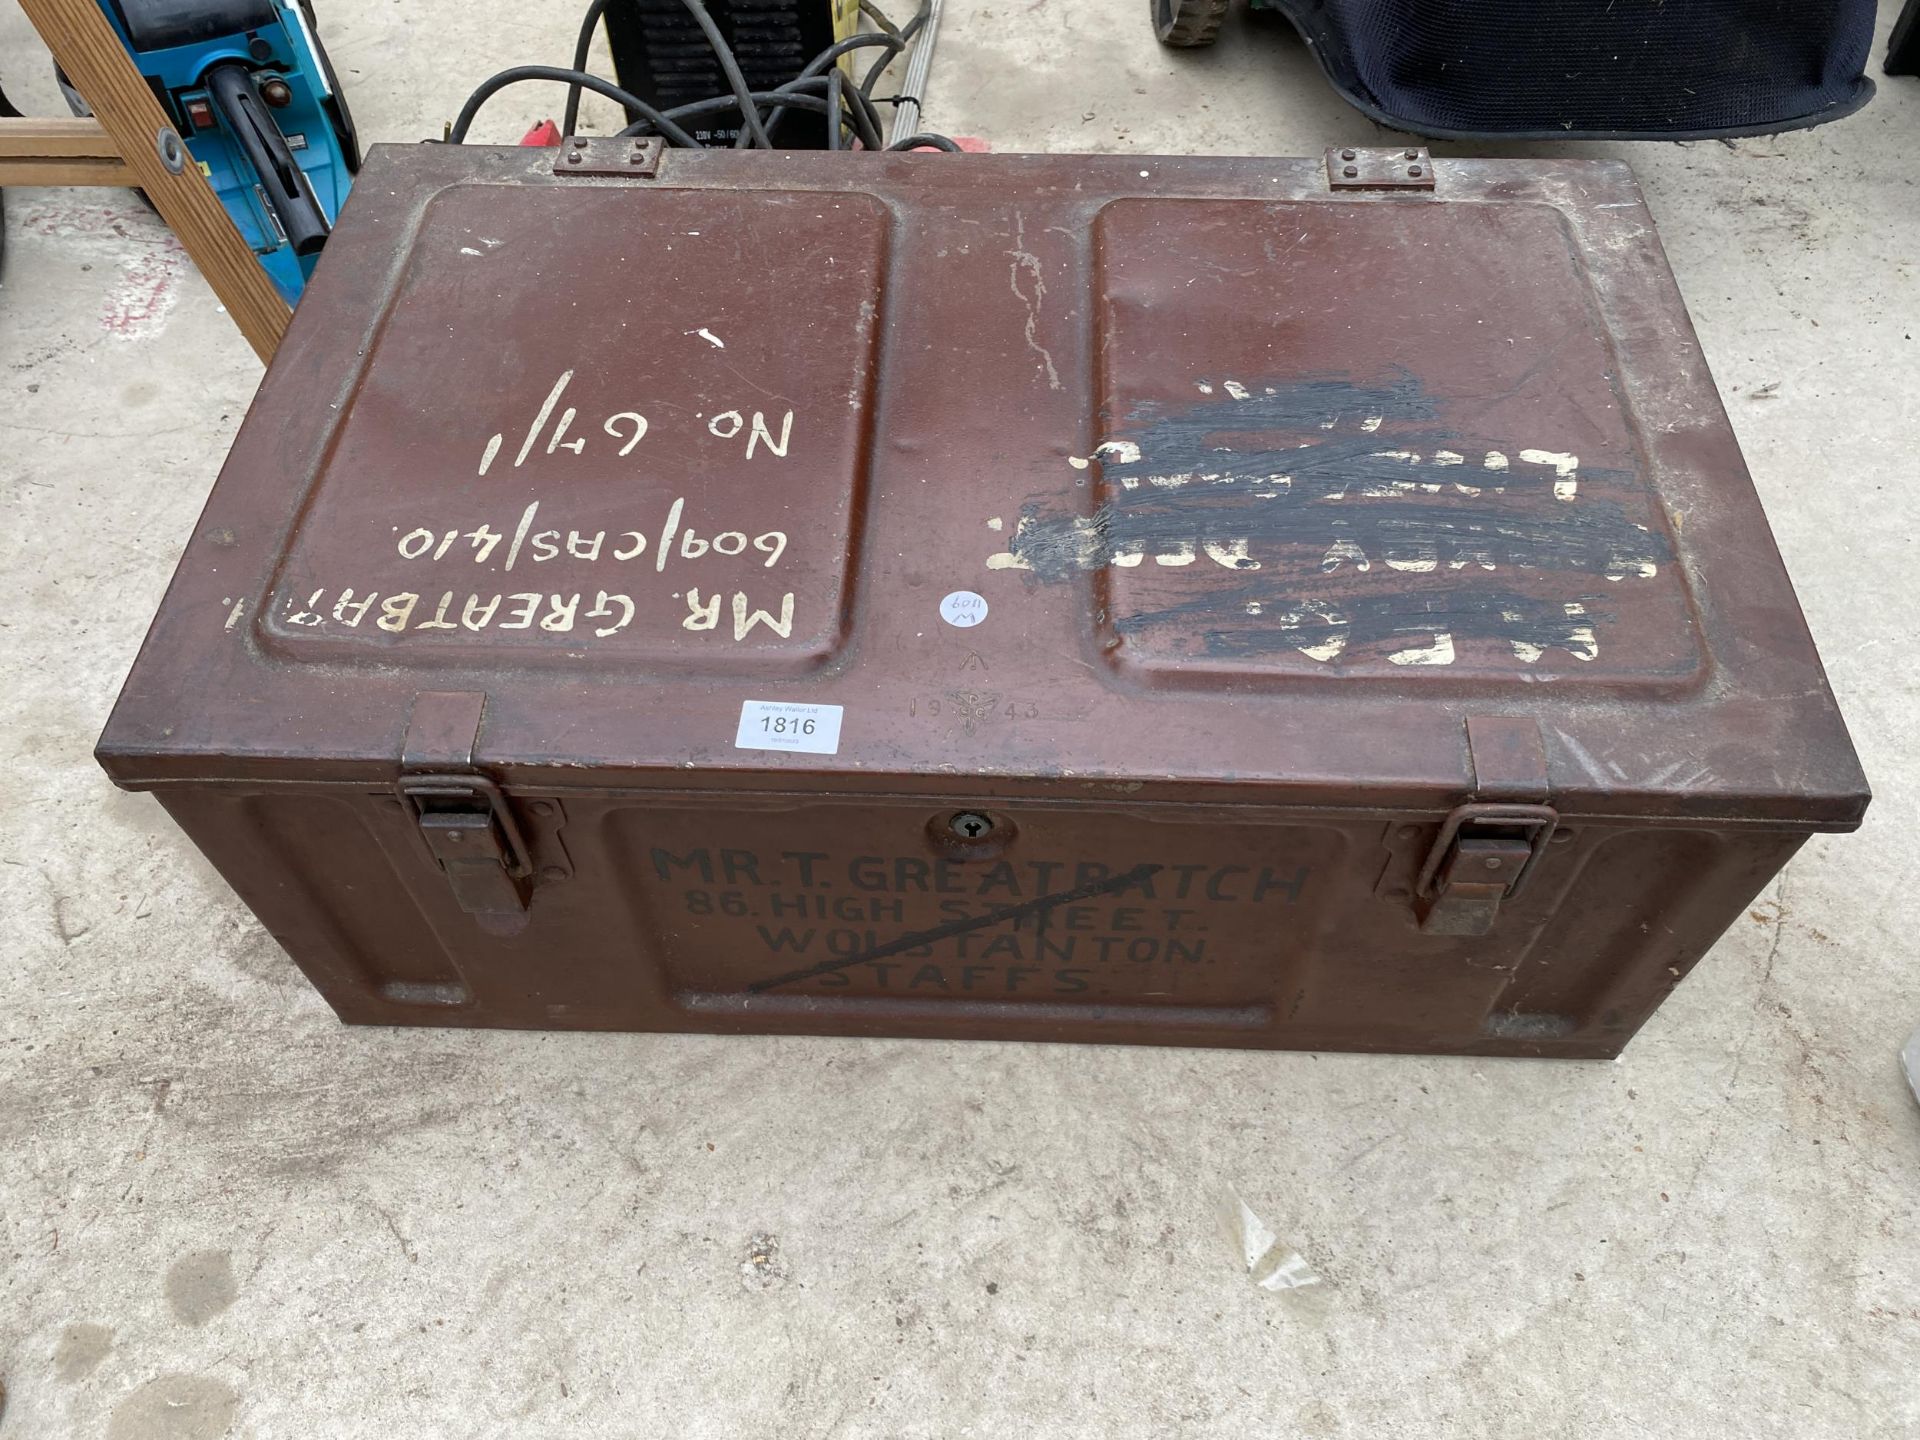 A VINTAGE MILITARY METAL CHEST DATED 1943